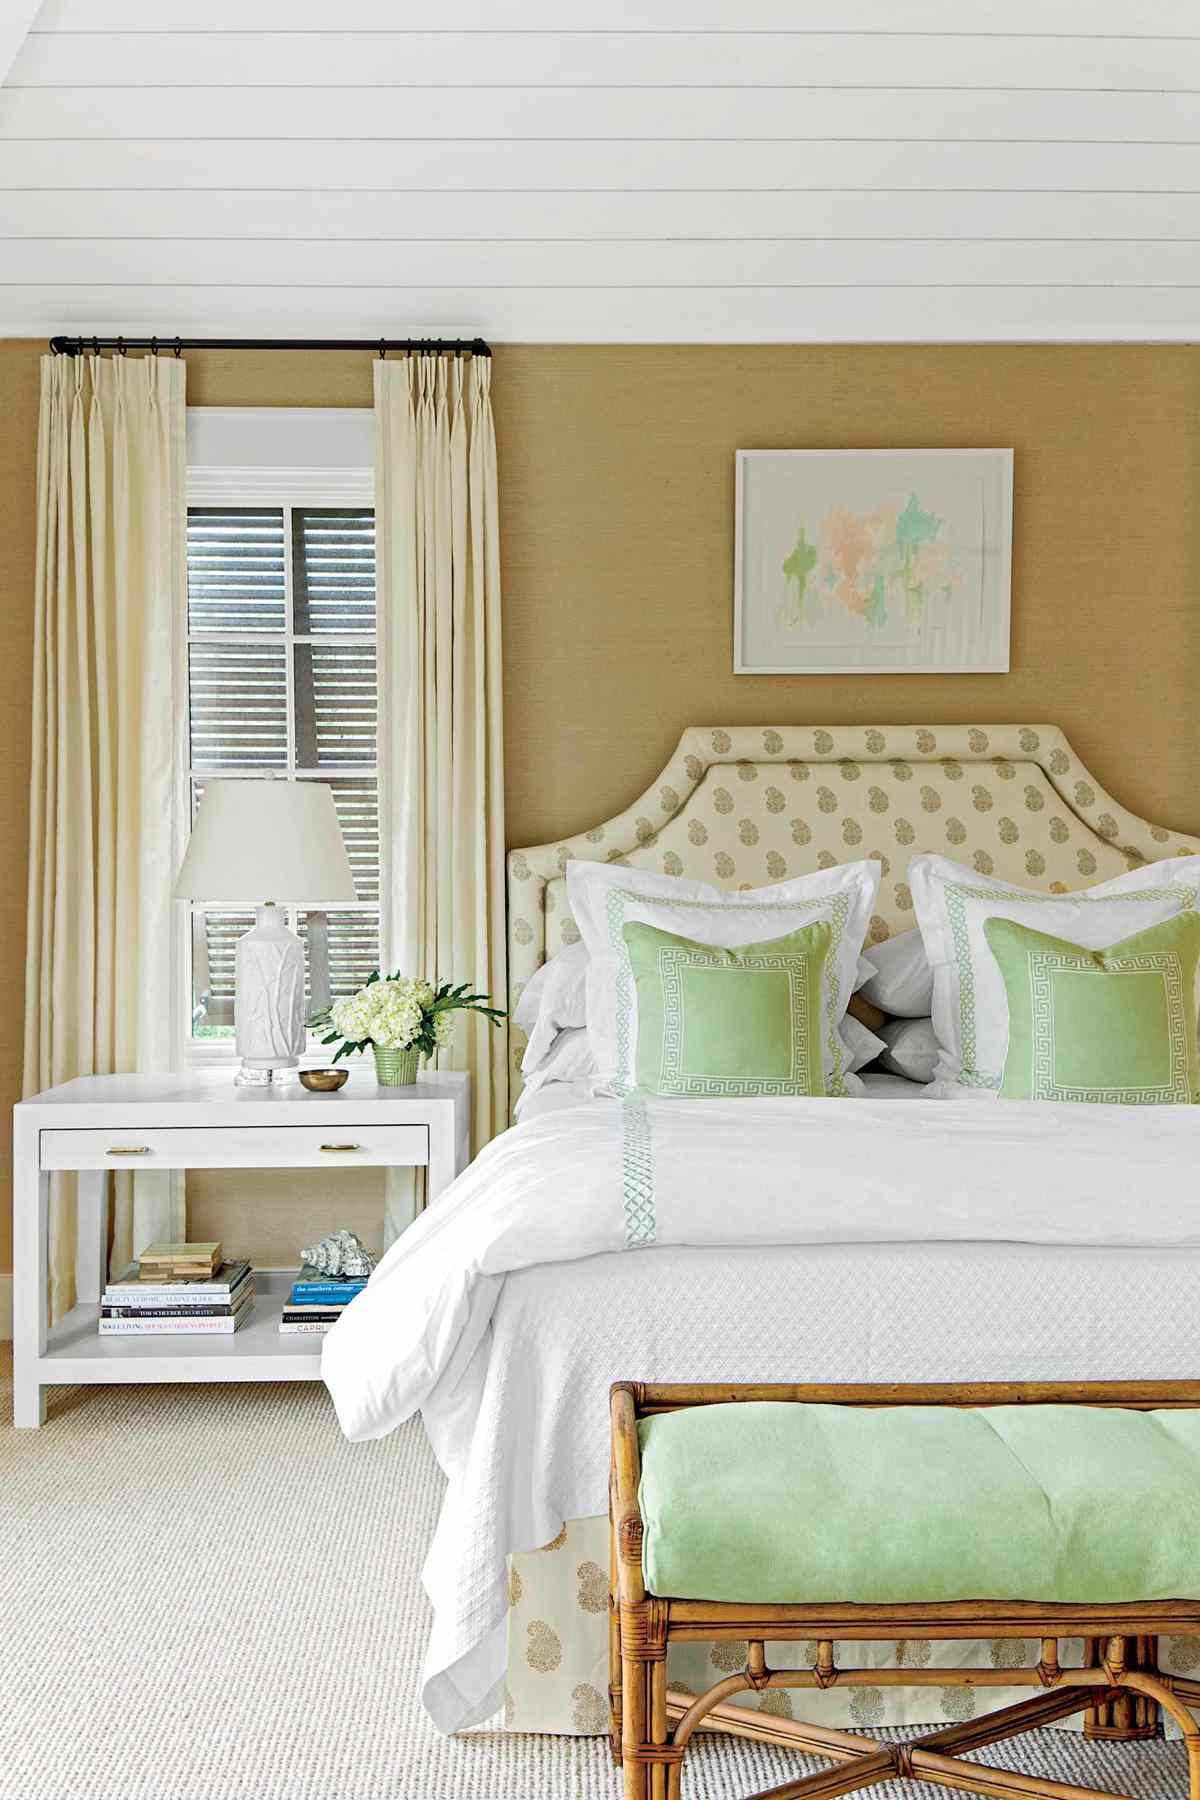 Master Bedroom Decorating Ideas Southern Living